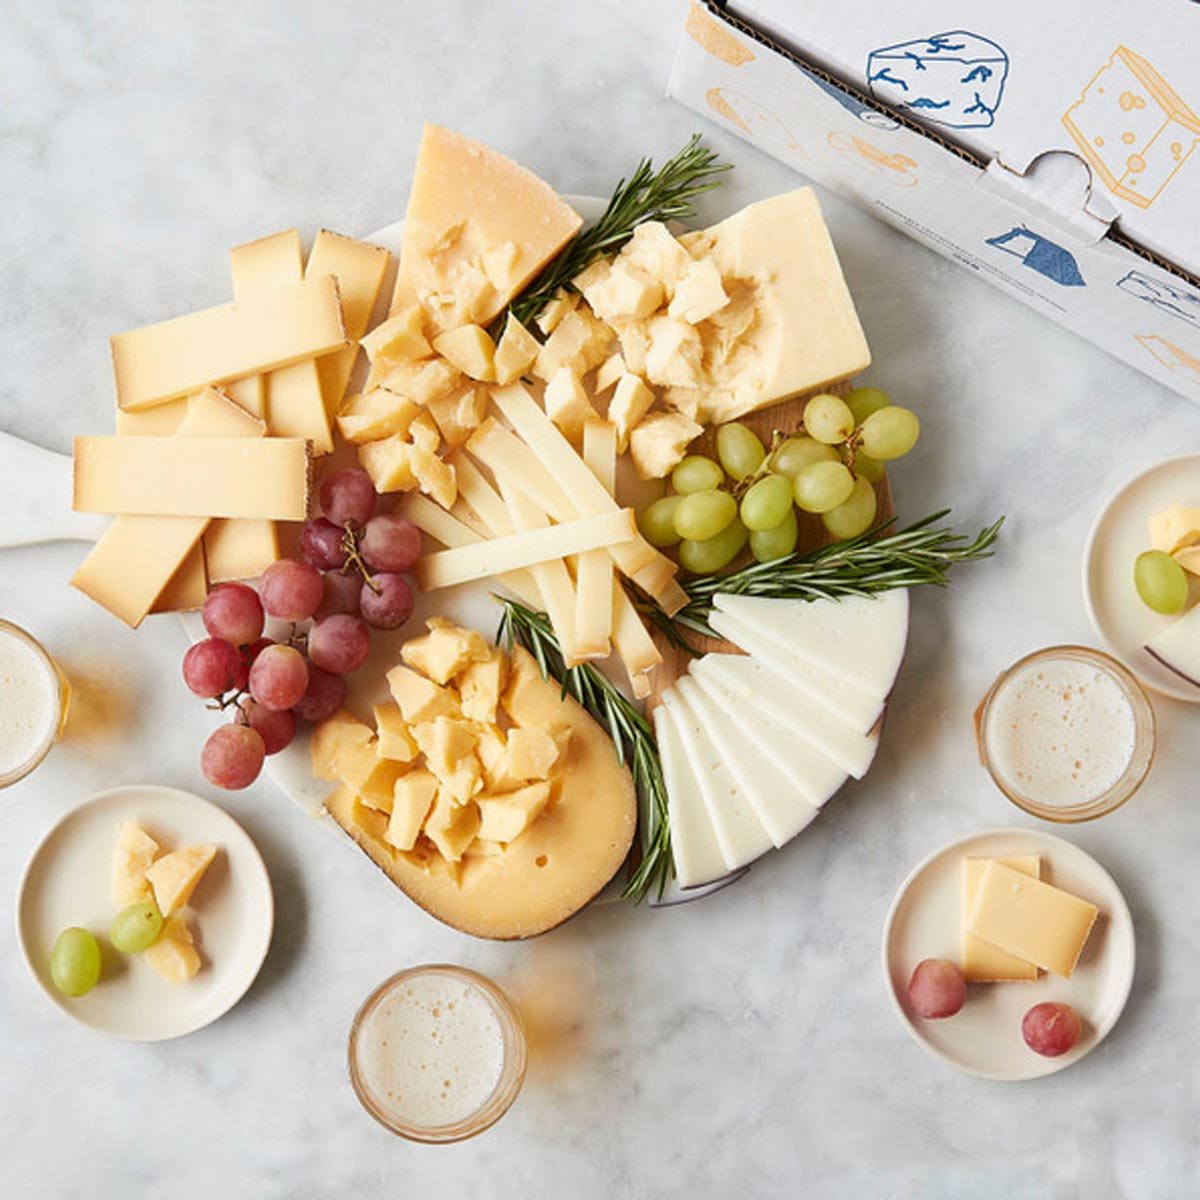 Cheeses Of The World Sampler